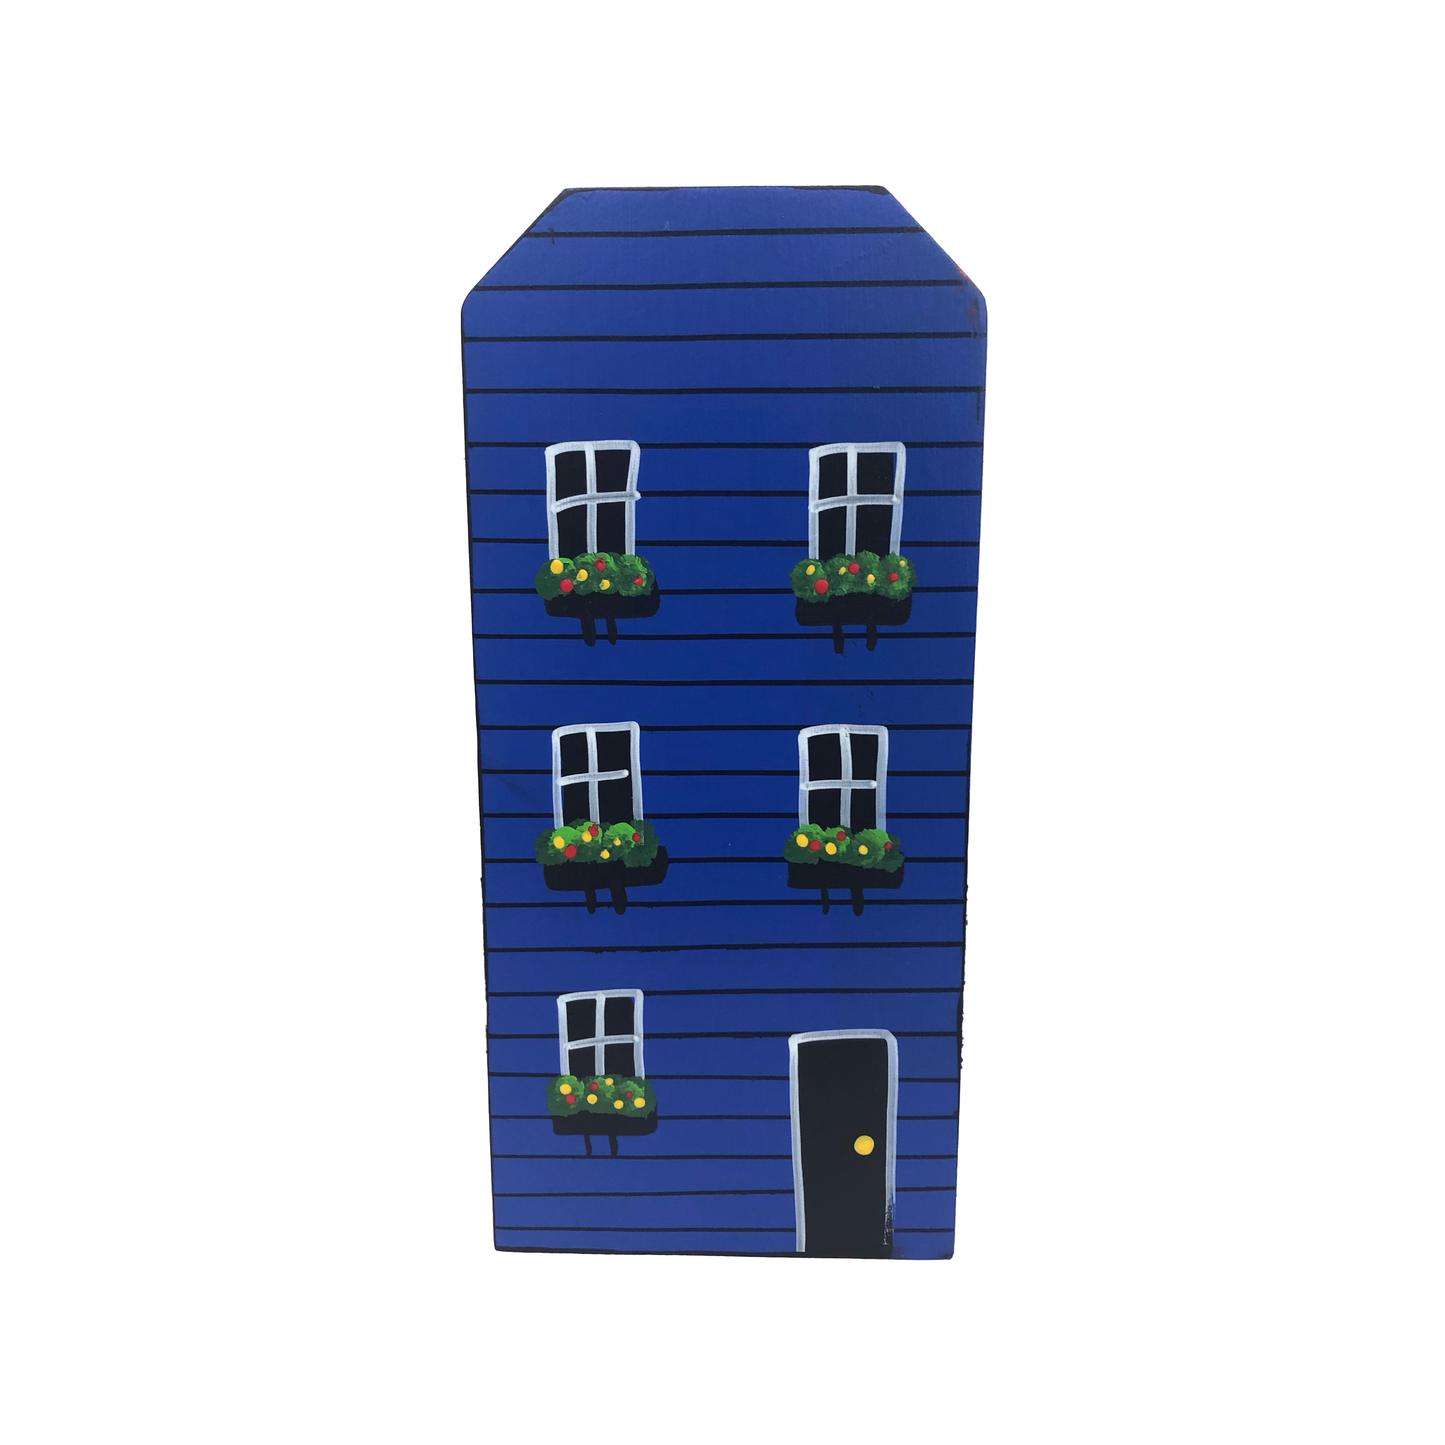 Hand-Painted Jelly Been Row House Paper Towel Holder - 3 colors